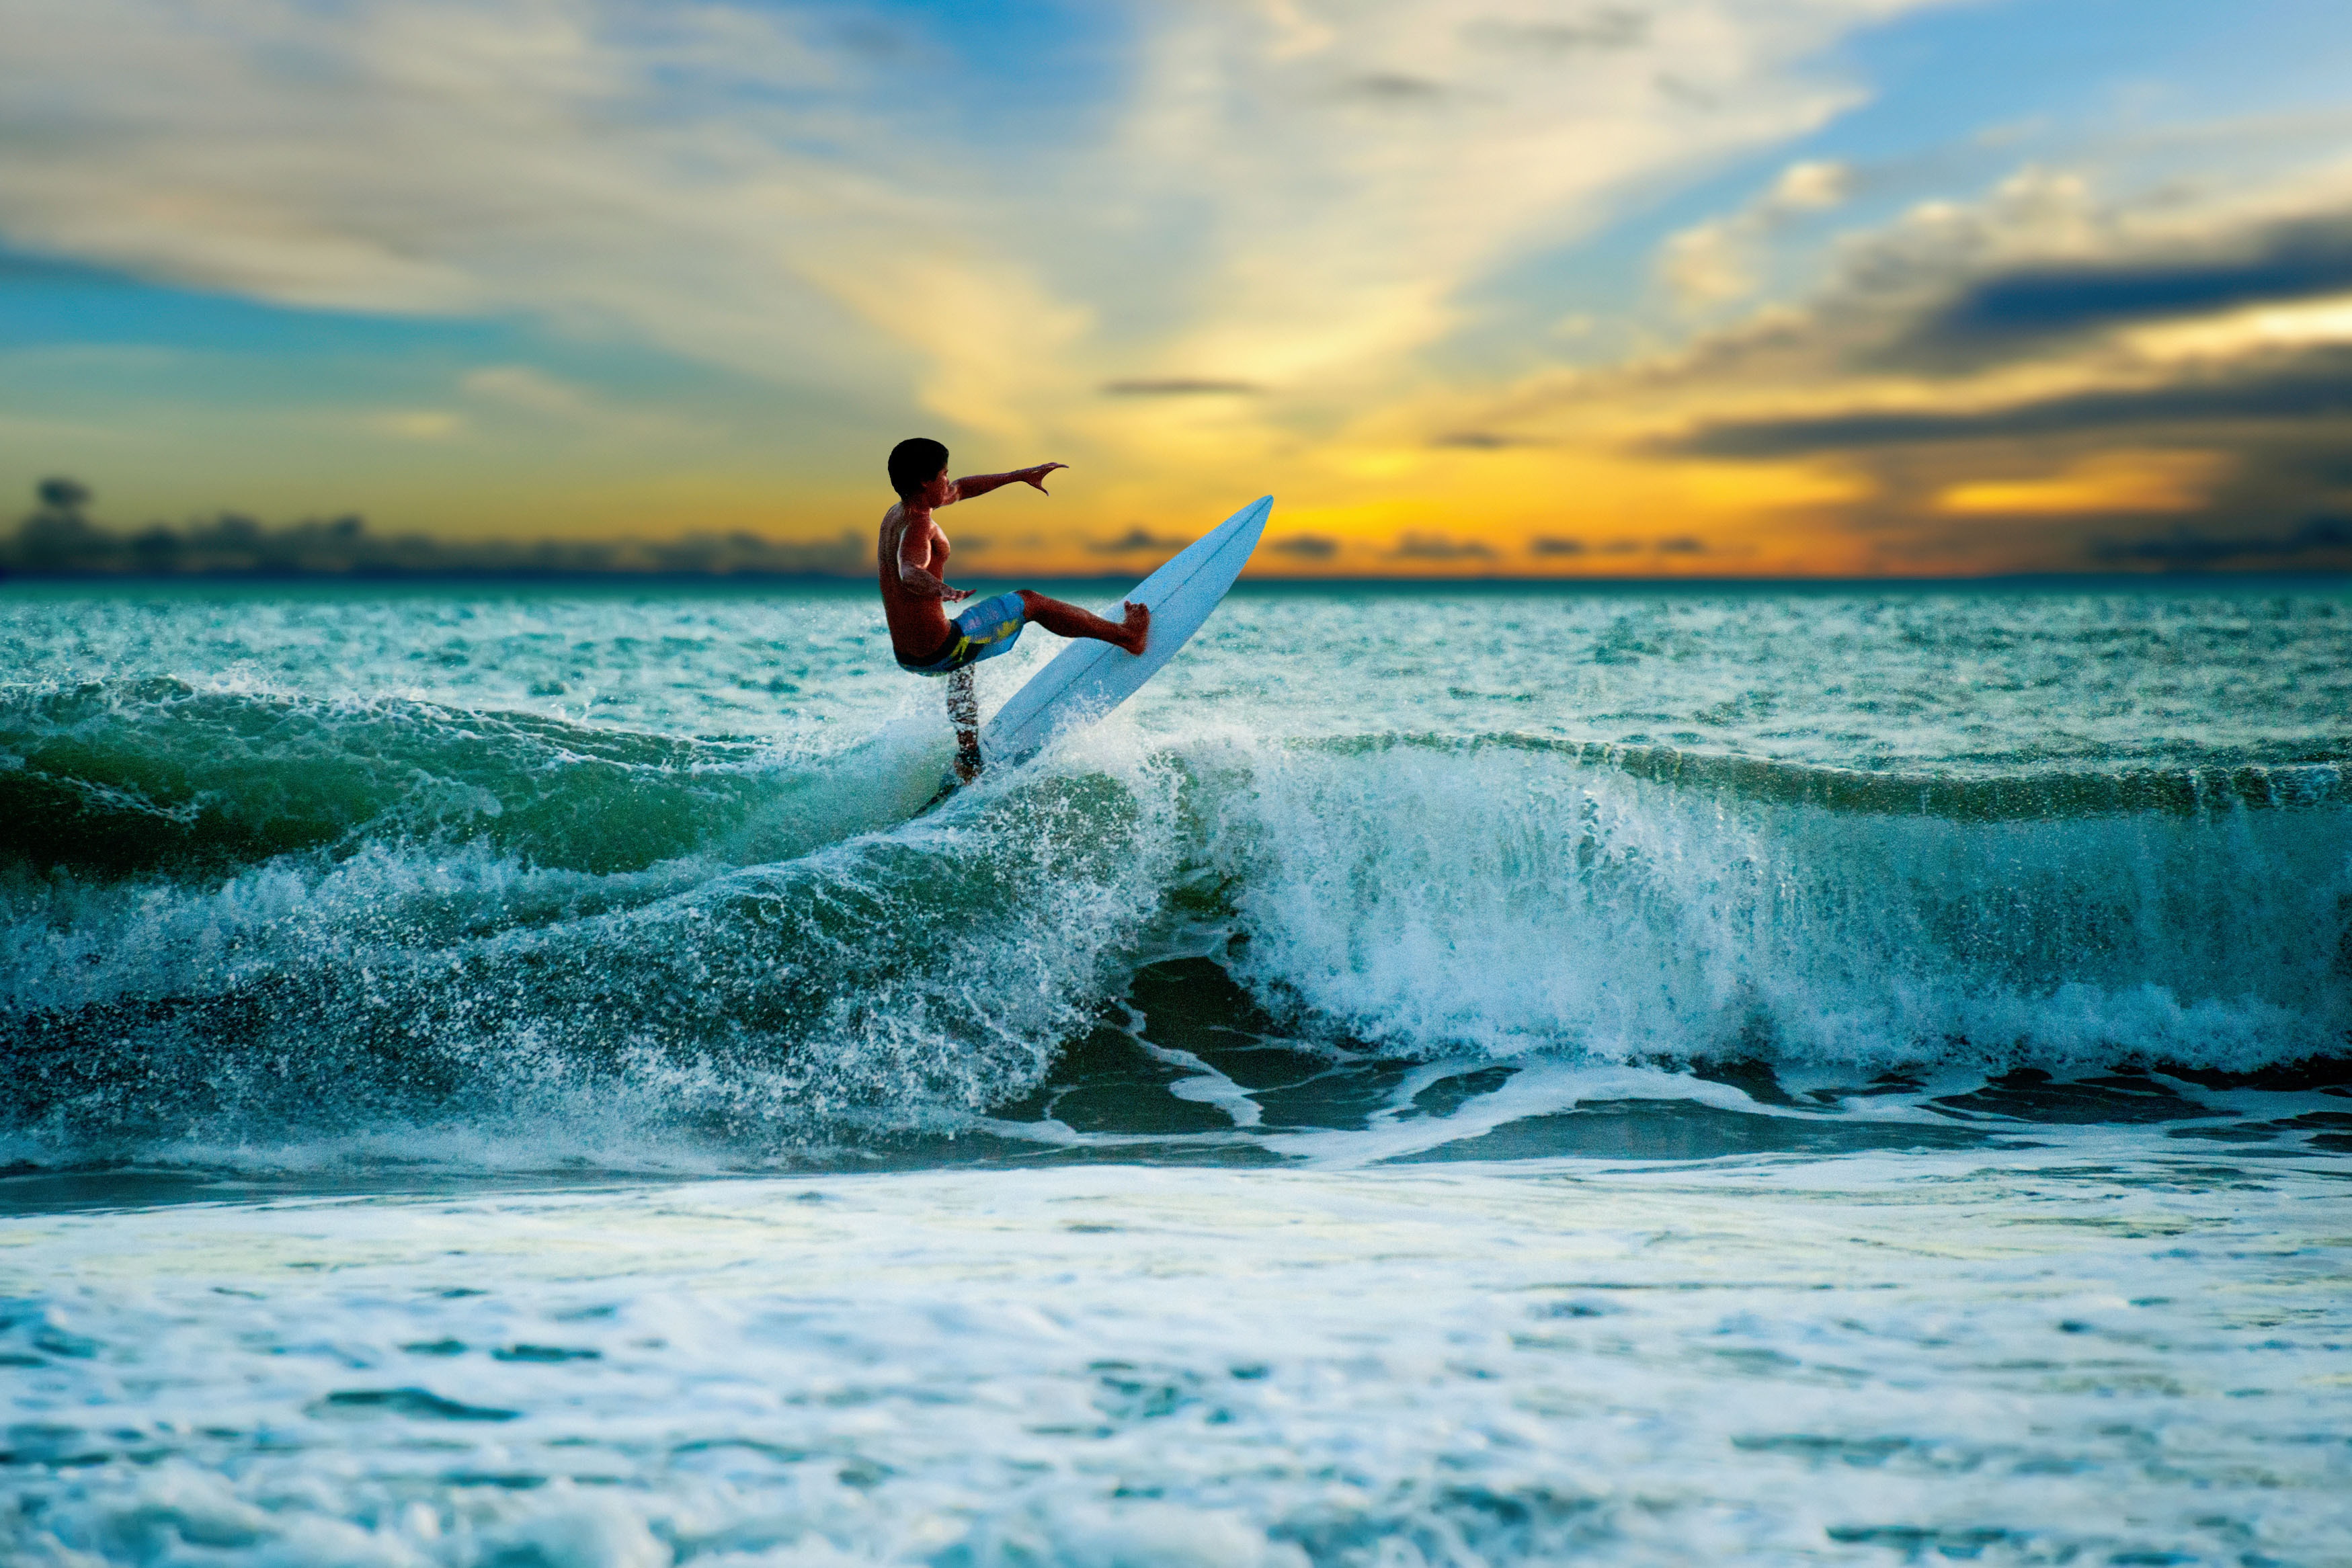 Athletic surfer with board on a wave in the ocean